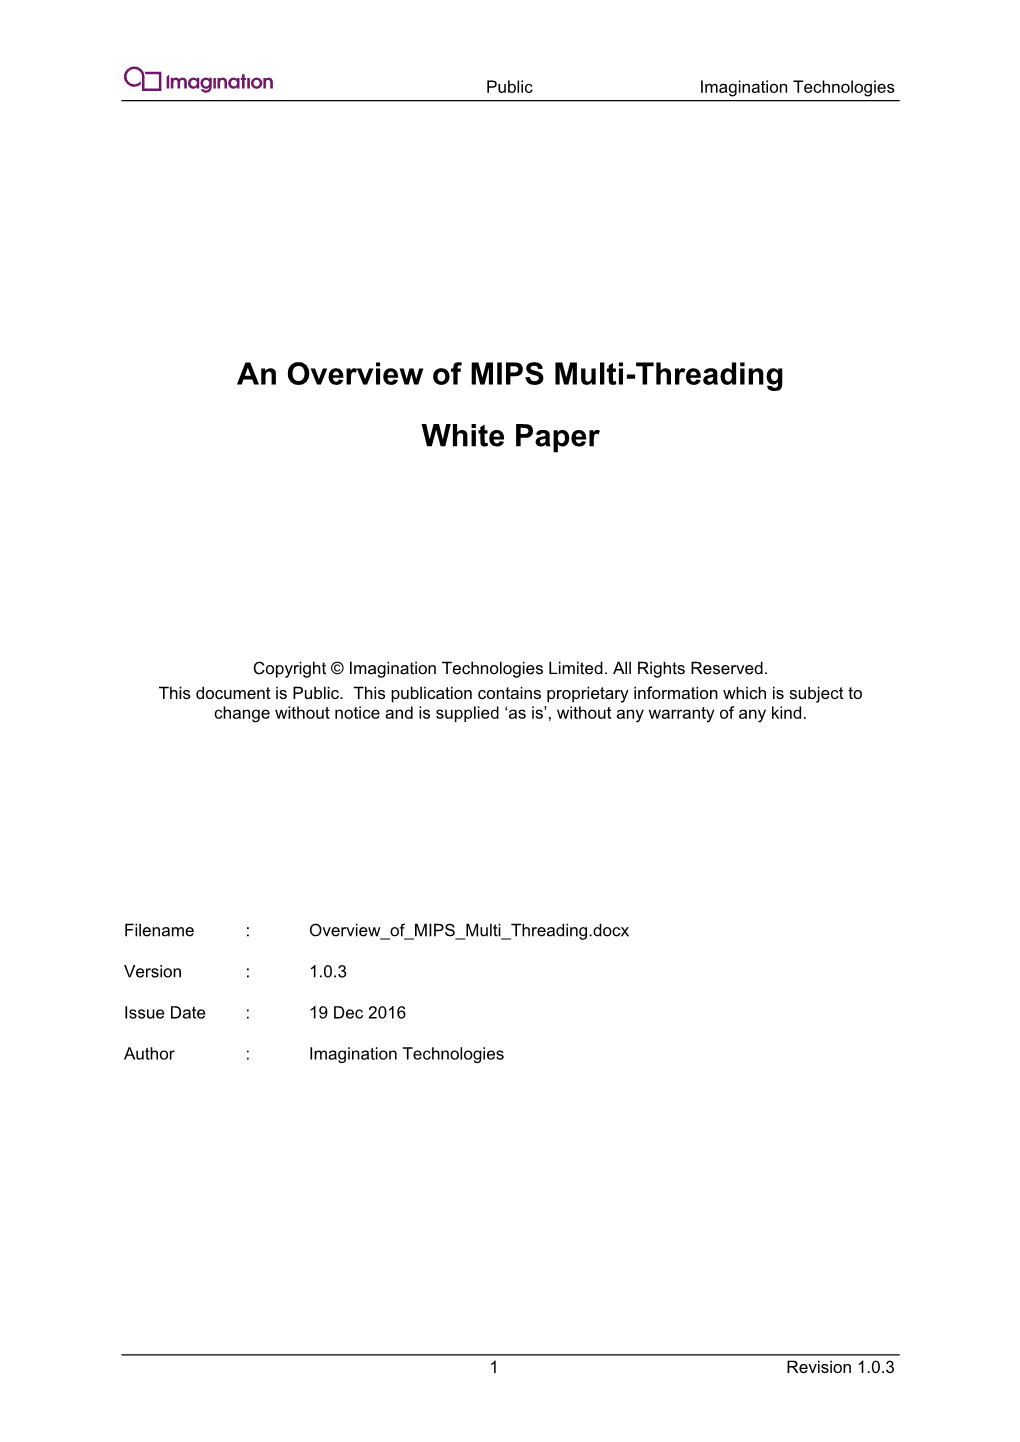 An Overview of MIPS Multi-Threading White Paper